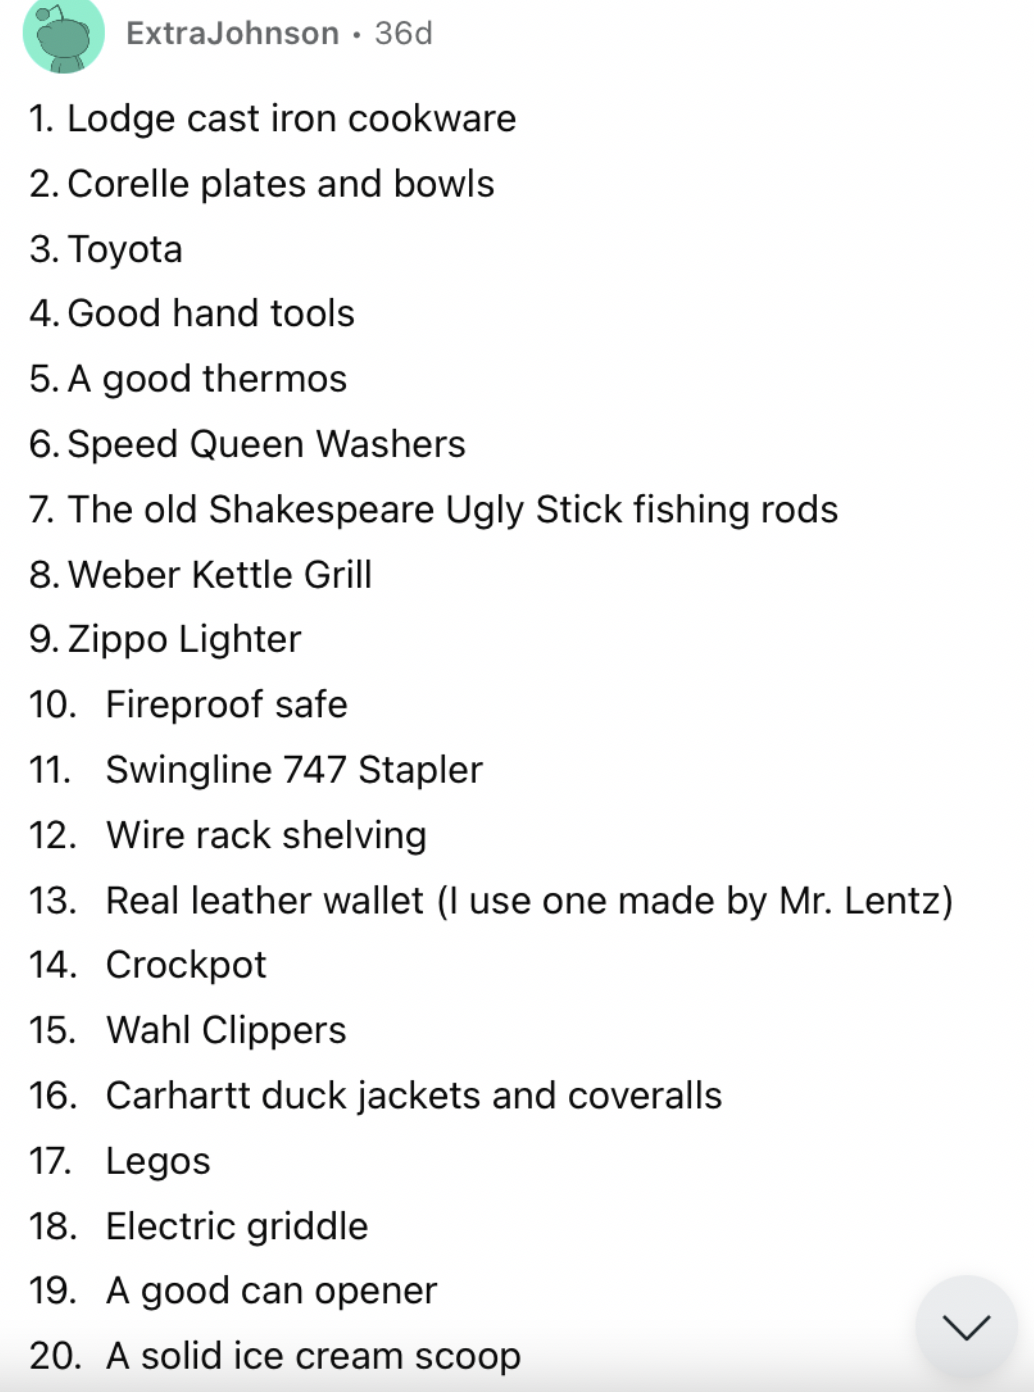 Reddit screenshot featuring numerous items that will last a very long time.